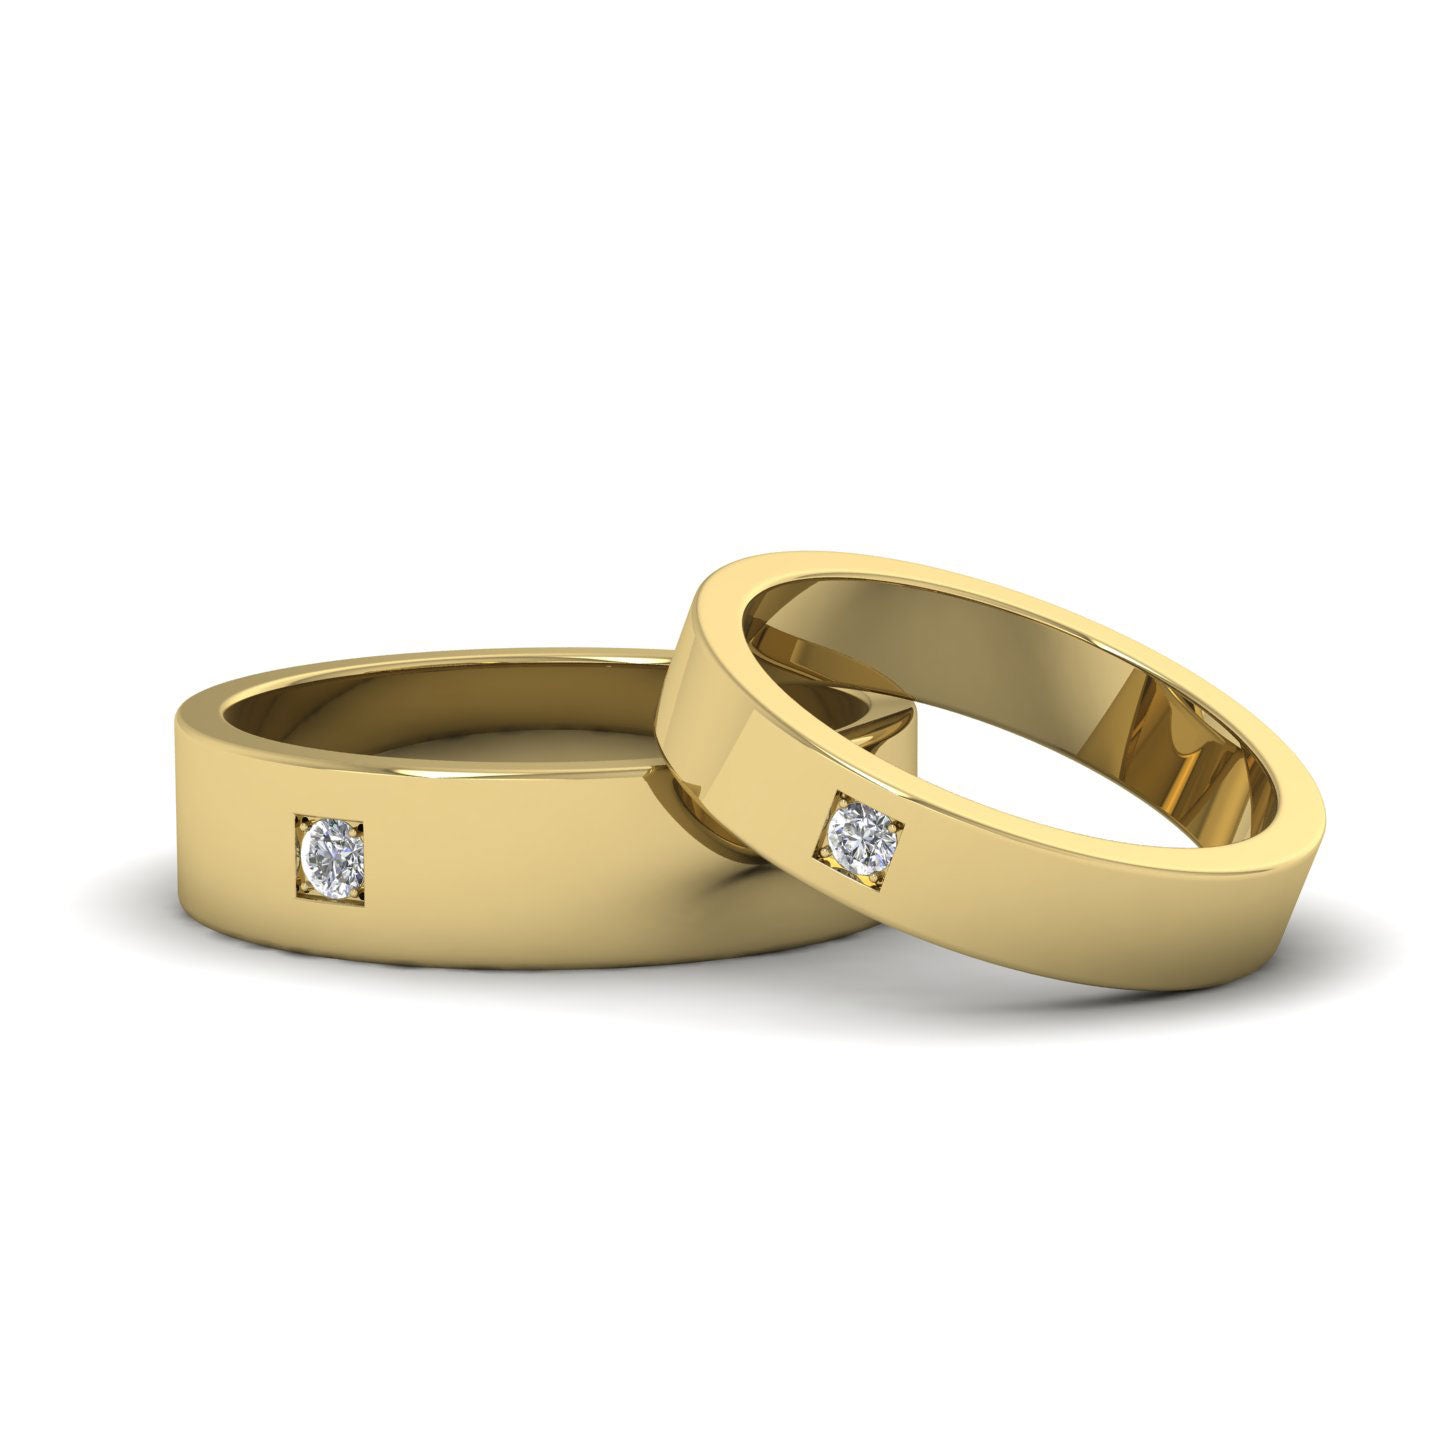 Single Diamond With Square Setting 22ct Yellow Gold 6mm Wedding Ring